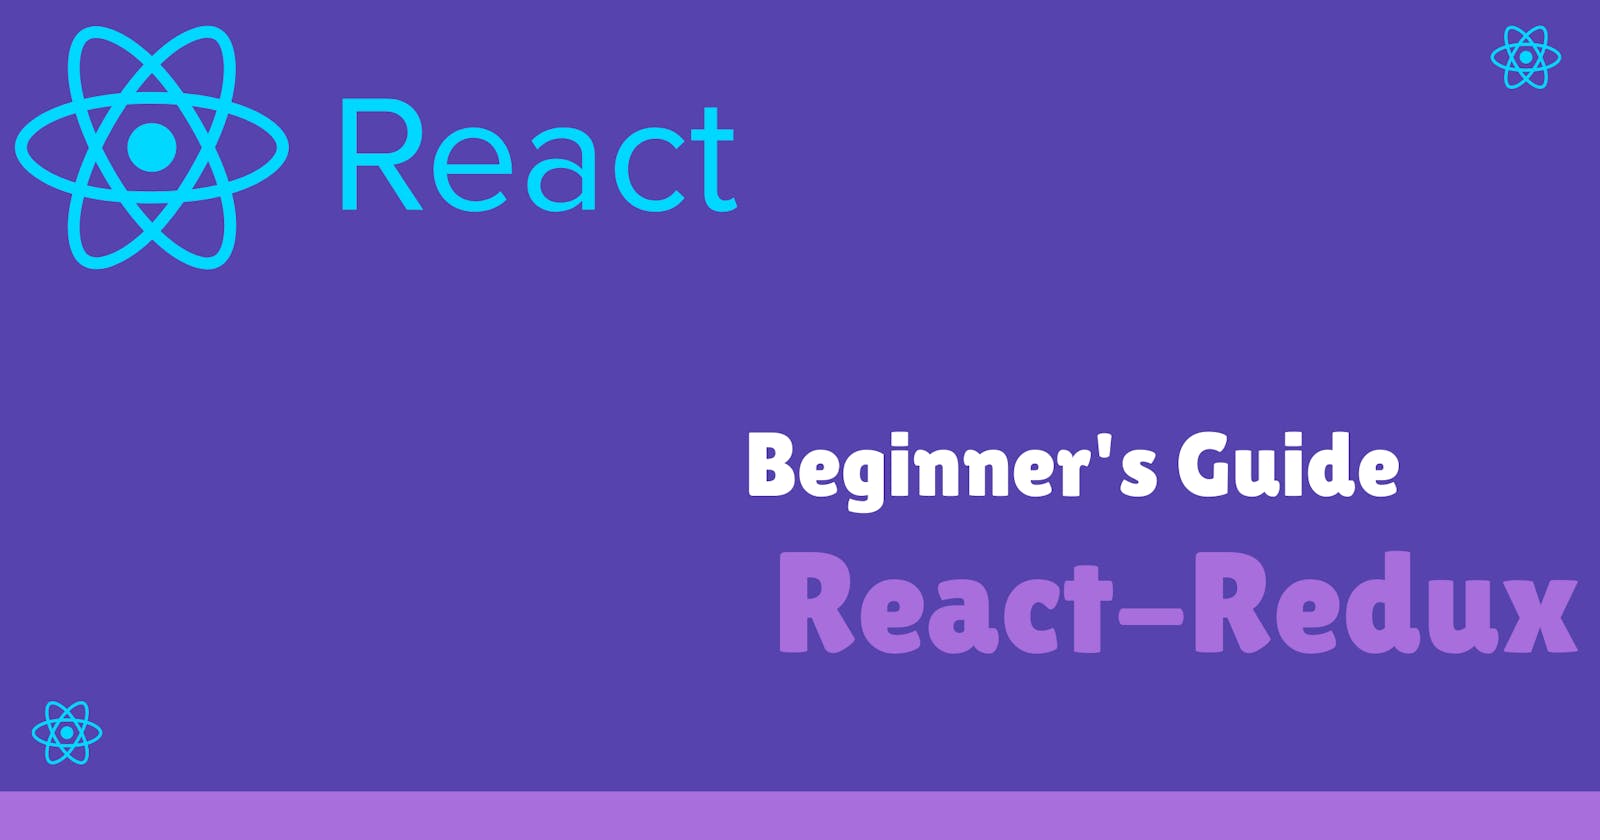 Beginner's Guide to React-Redux Tutorial : Learn by developing two small applications